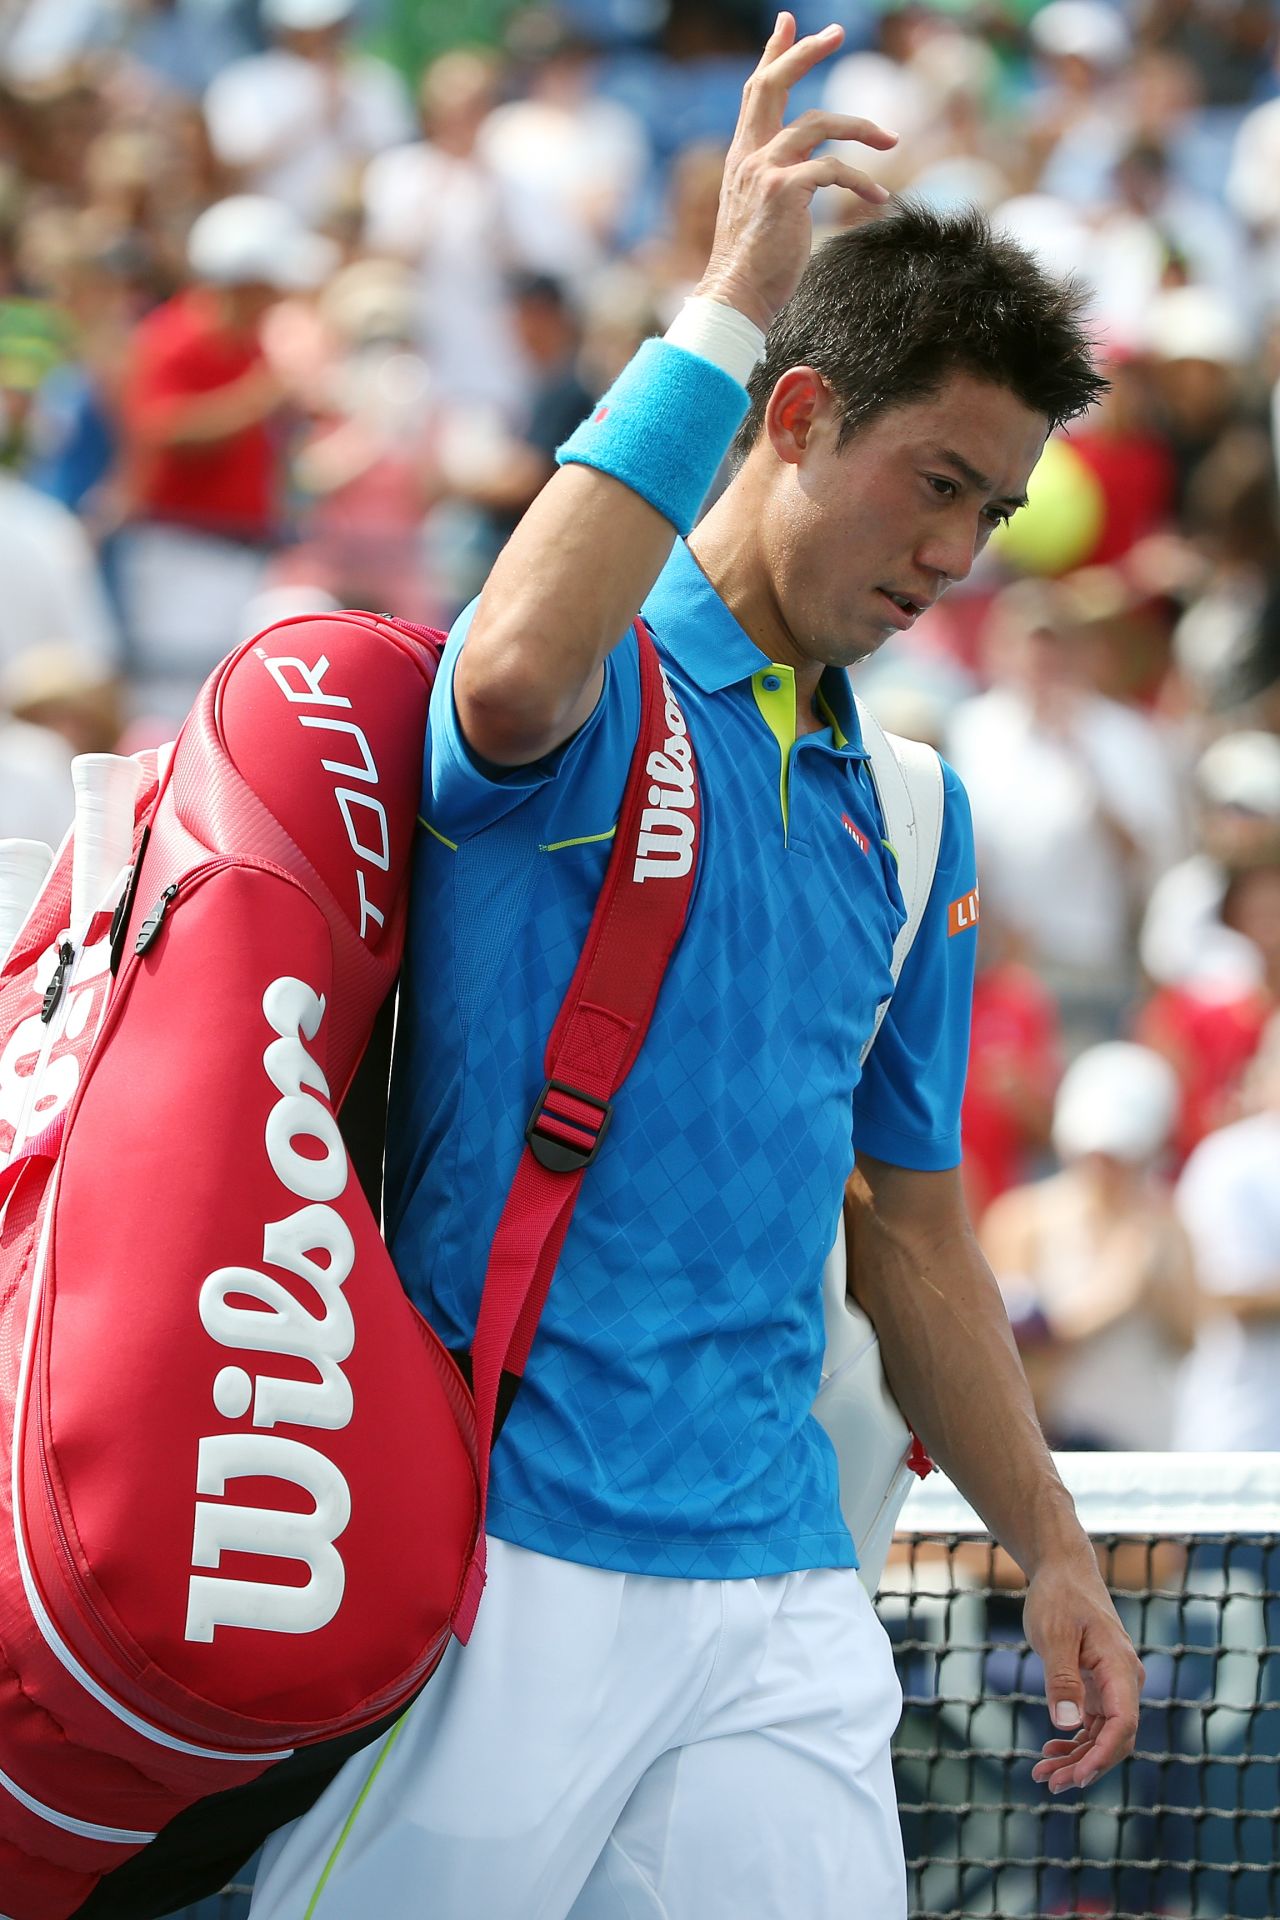 A dejected Nishikori entered this year's U.S. Open at No. 4, his highest ever ranking. 